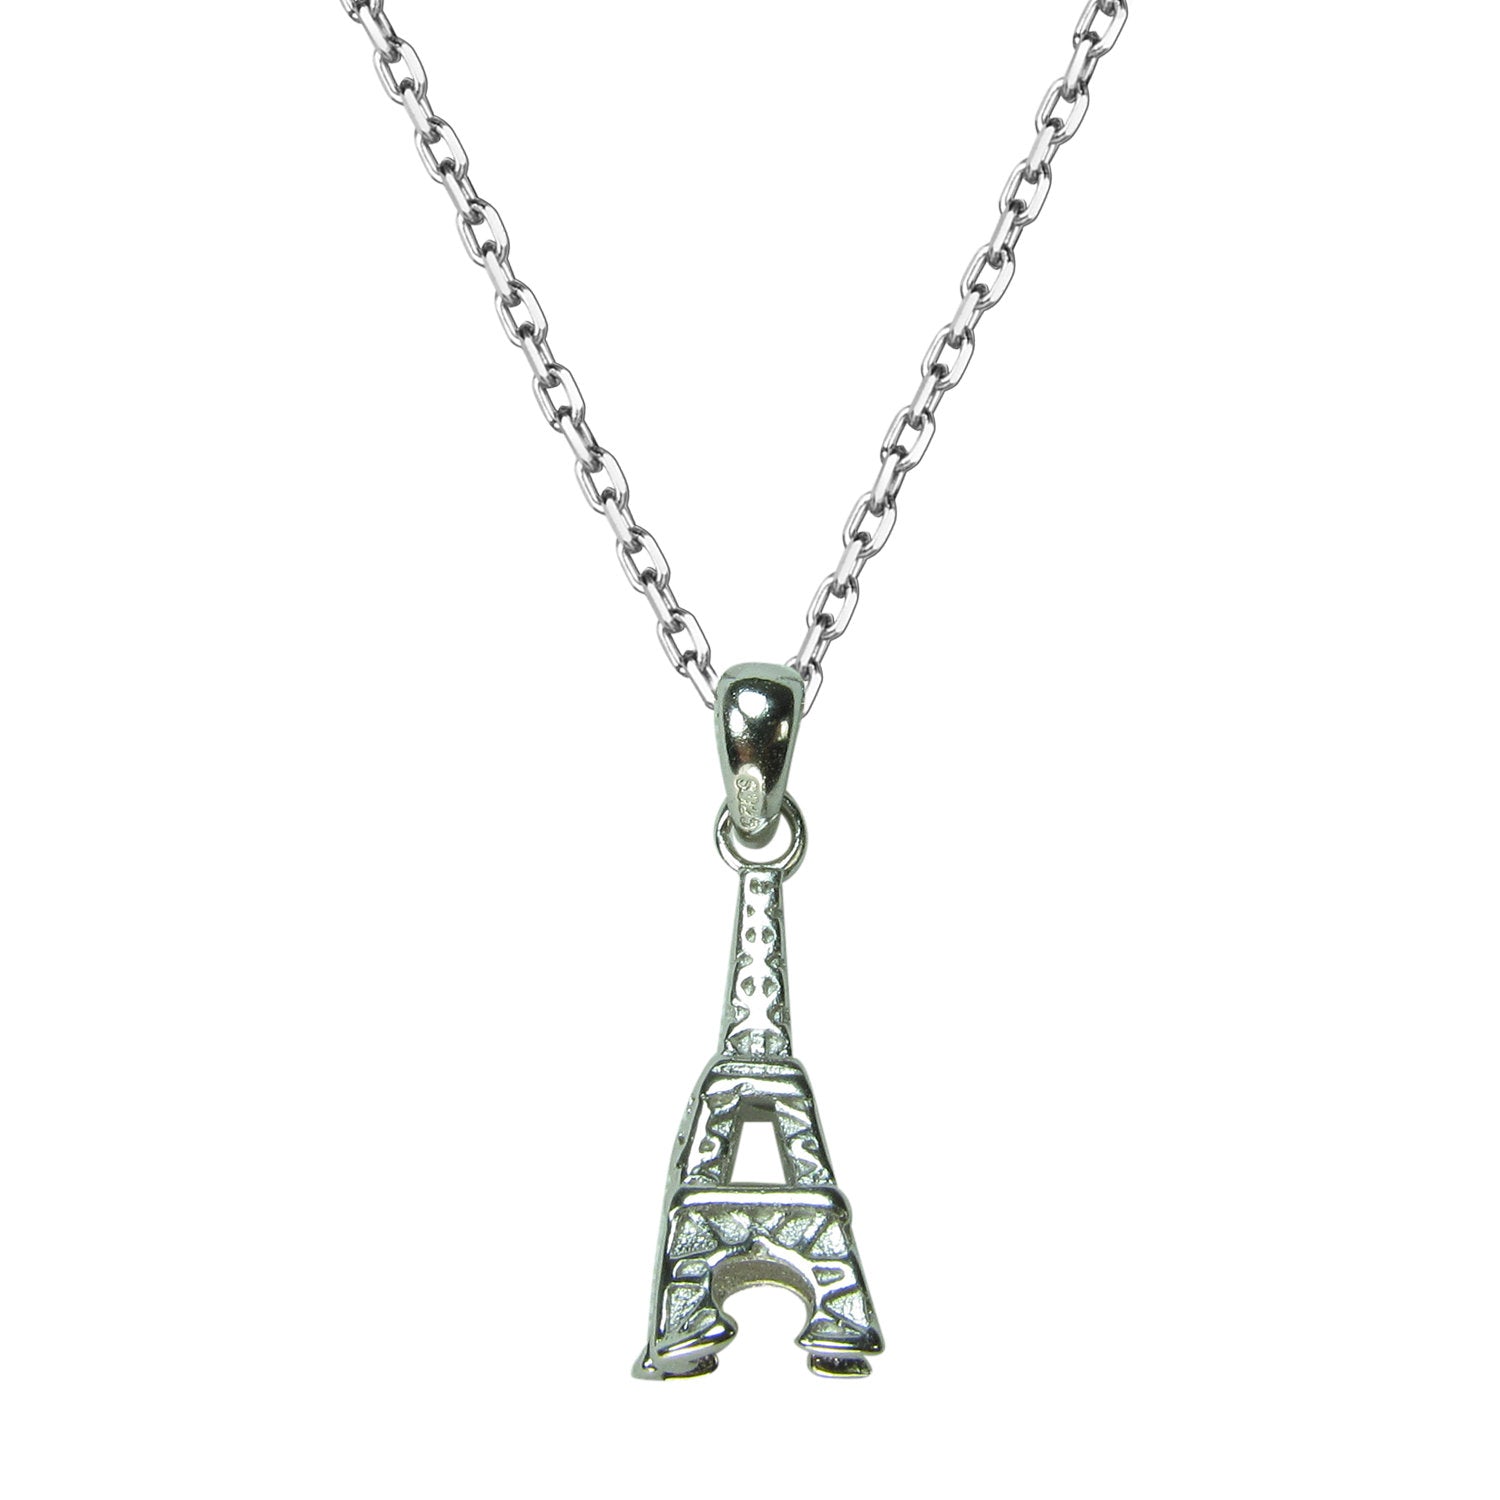 EIFFEL TOWER STERLING SILVER NECKLACE